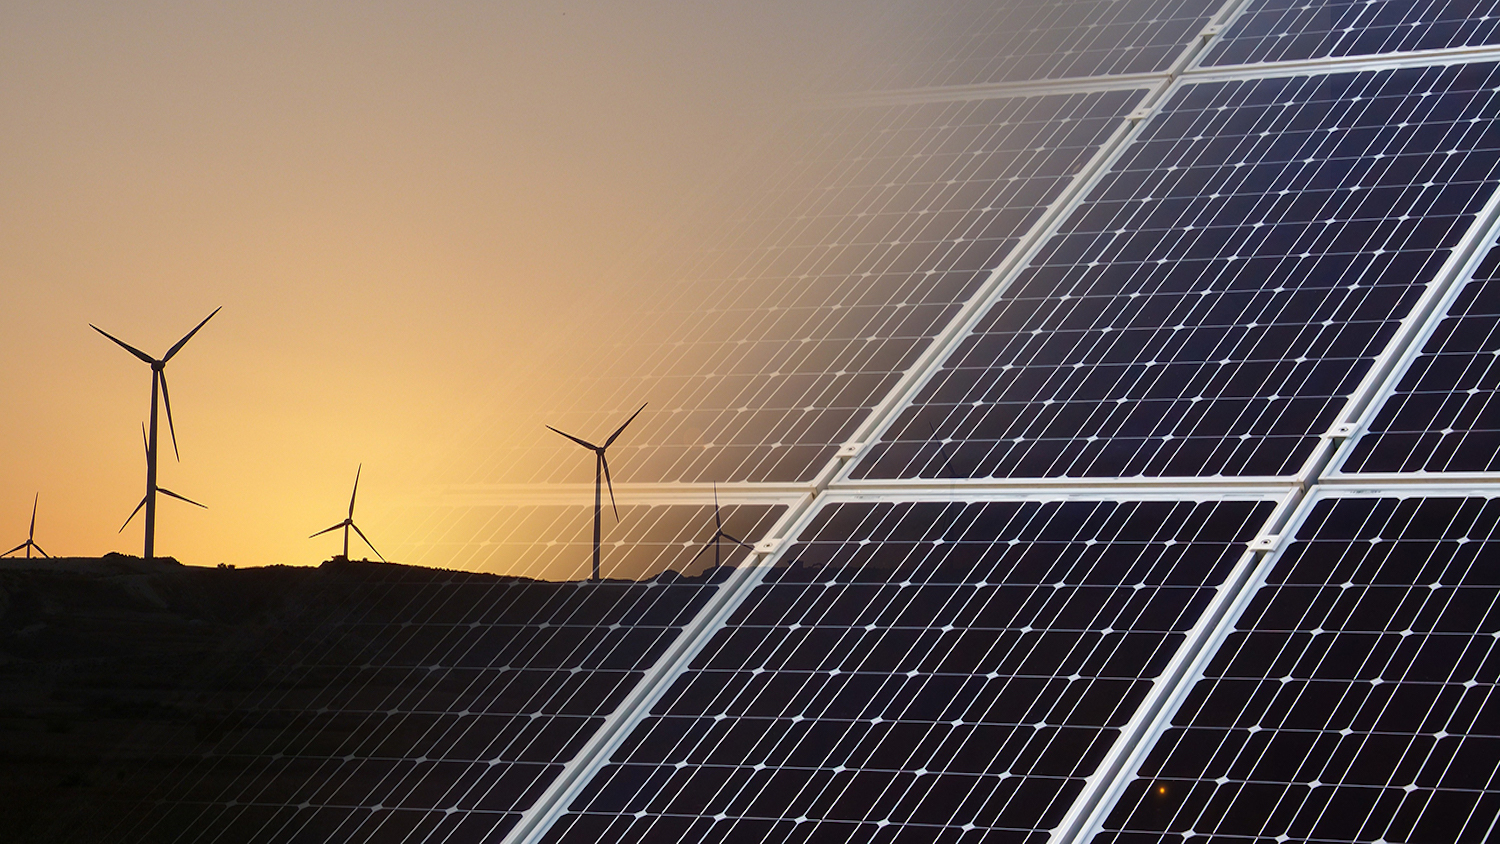 NC State to Offer Online Graduate Certificate in Renewable Energy Development